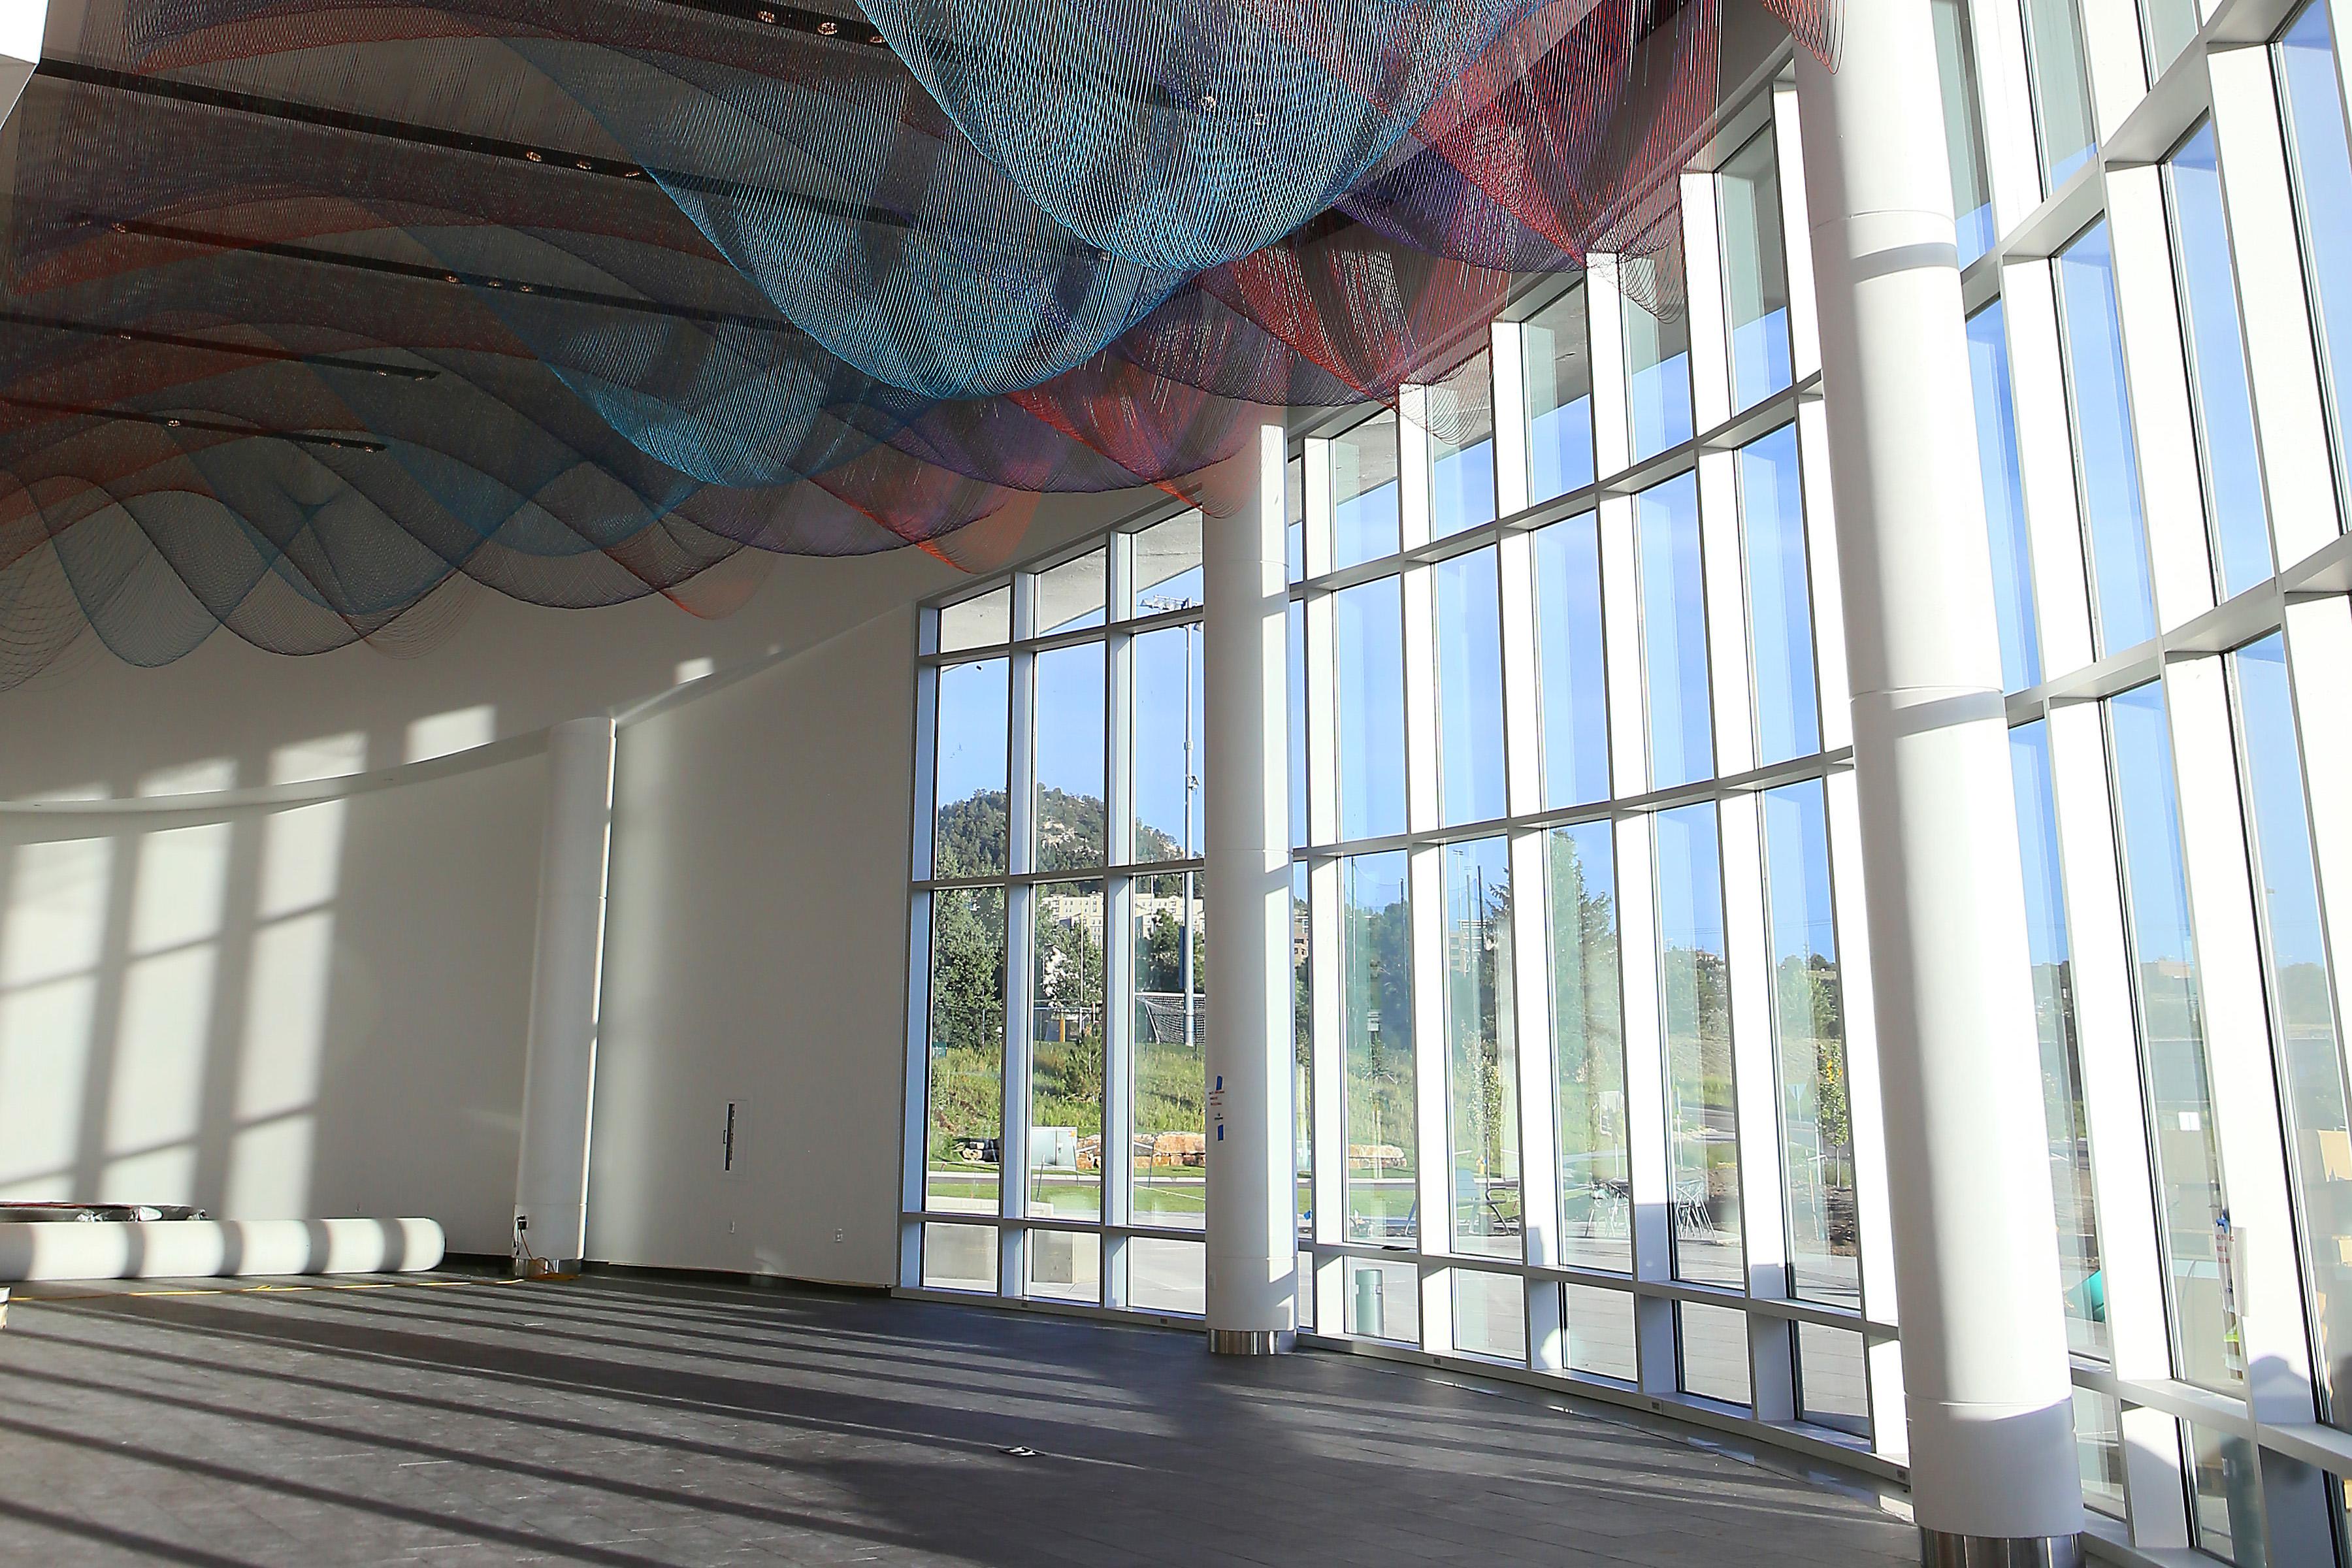 Lobby of the Ent Center for the Arts